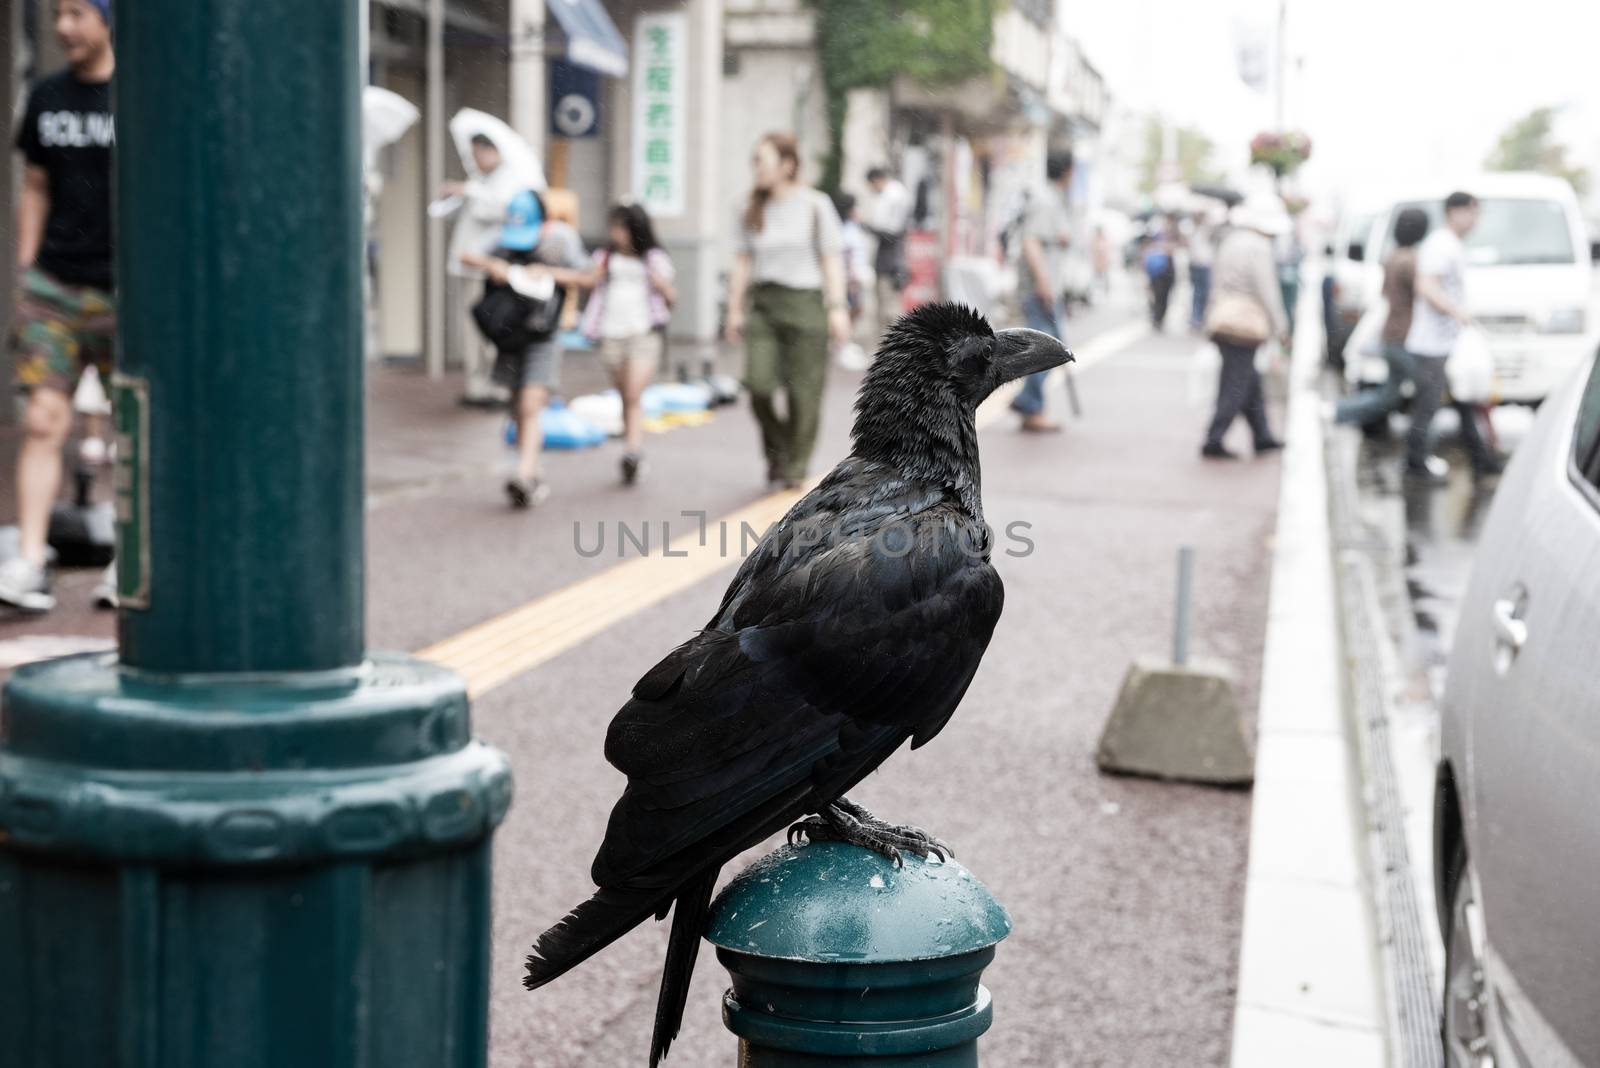 Black crow in the city with people in the background.